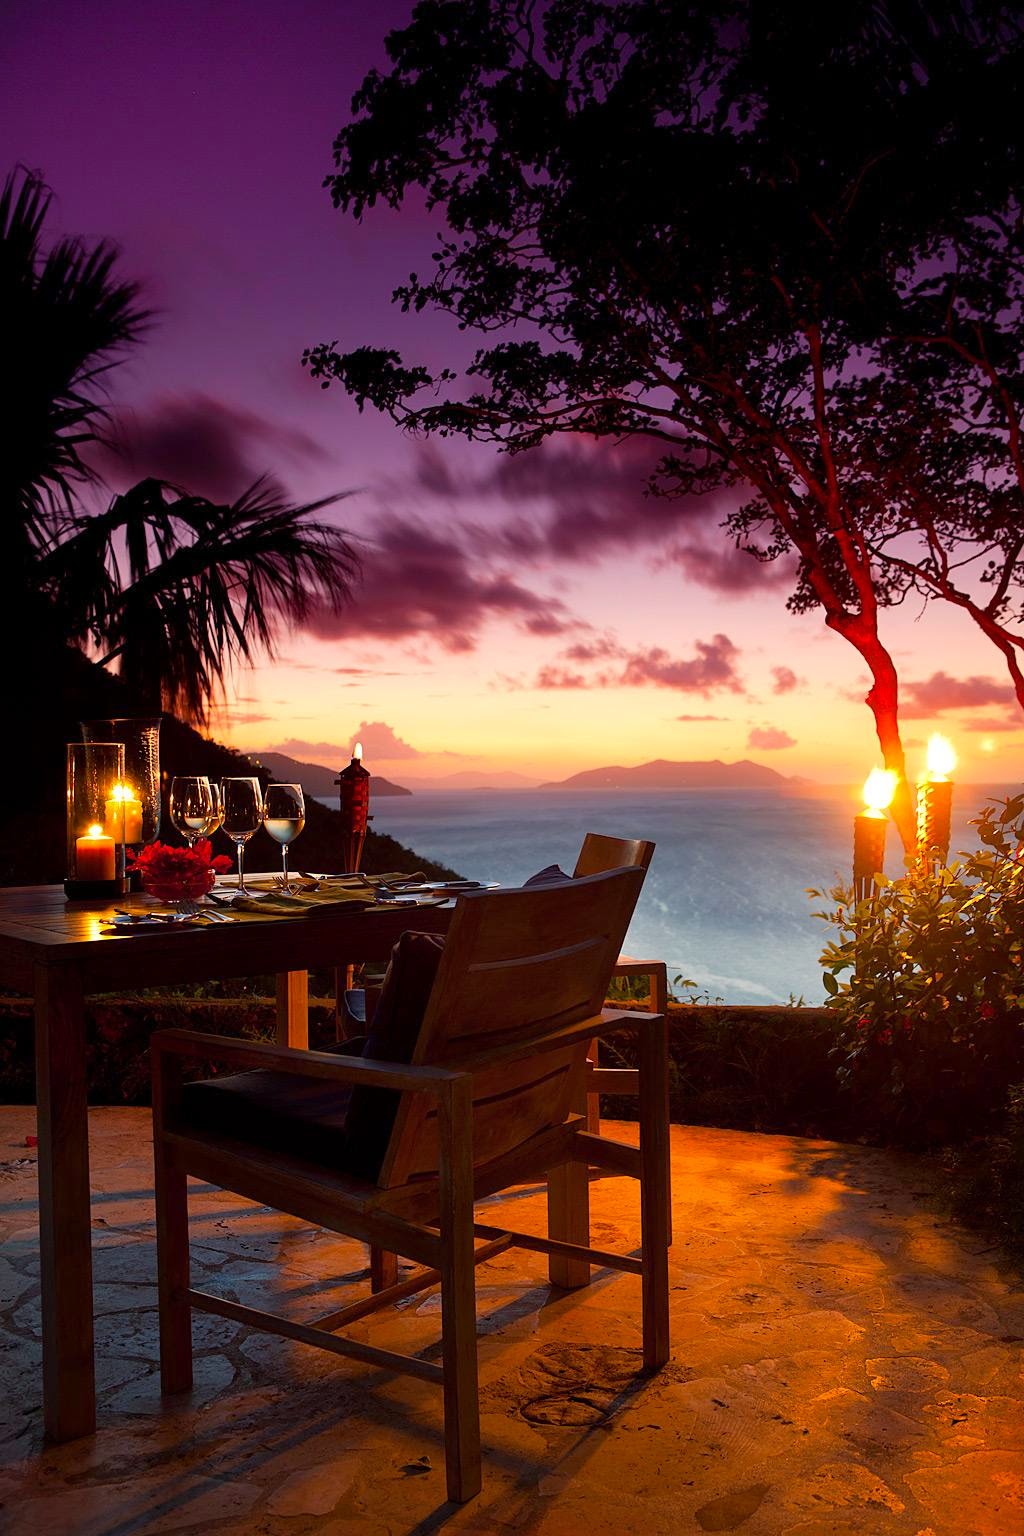 Guana Island | The List of Most Romantic Summer Getaways for an Unforgettable Time